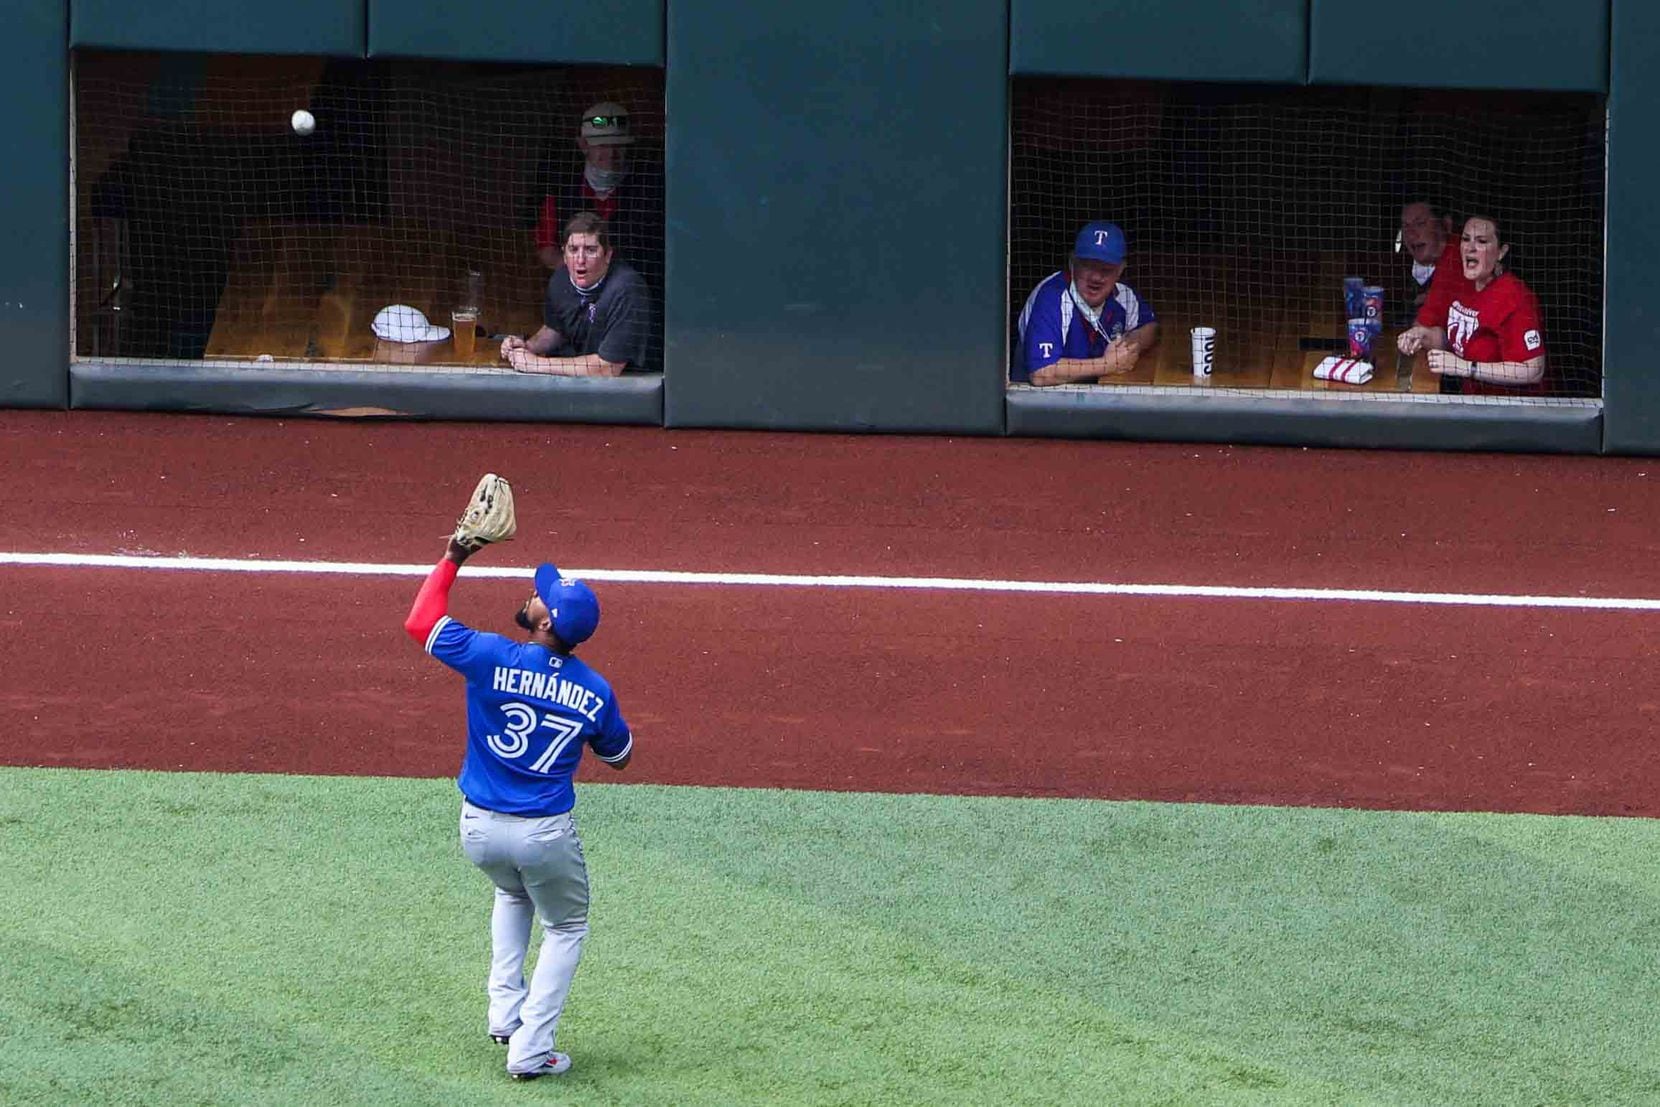 Toronto Blue Jays' outfielder Teoscar Hernandez No. 37 catches a fly ball at the Globe Life Field during opening against Texas Rangers day in Arlington, Texas on Monday, April 5, 2021. (Lola Gomez/The Dallas Morning News)